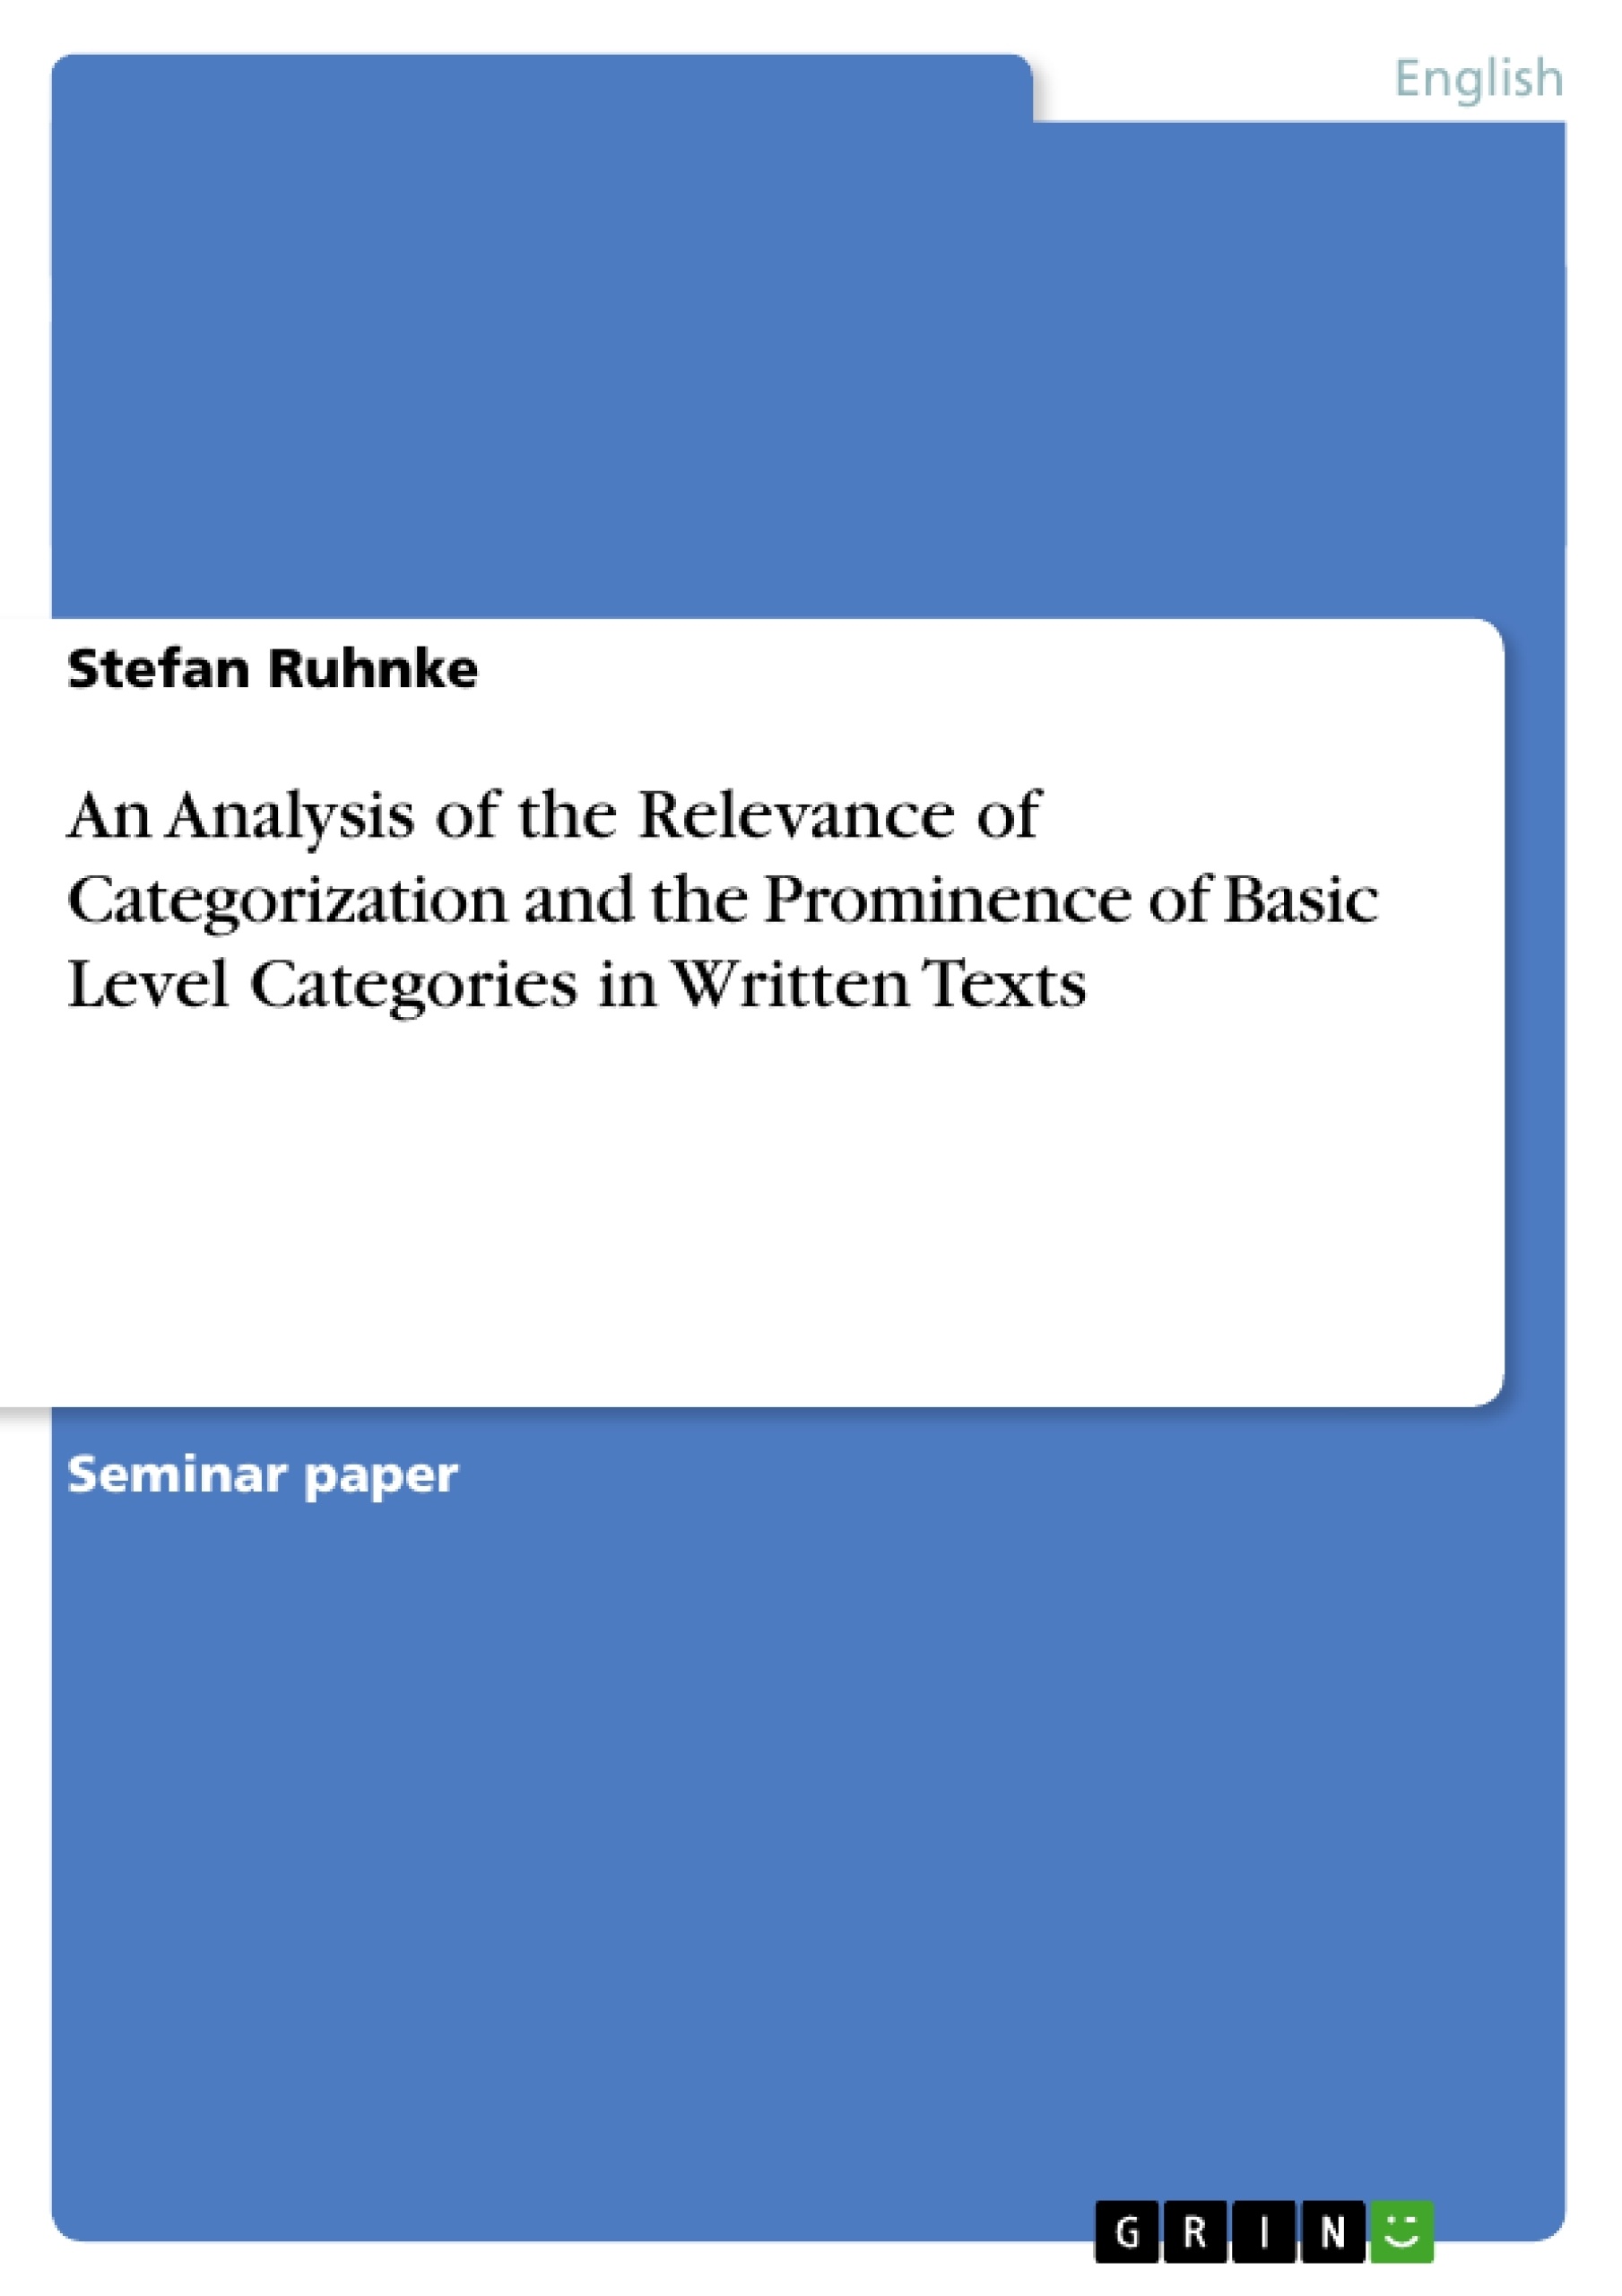 Title: An Analysis of the Relevance of Categorization and the Prominence of Basic Level Categories in Written Texts